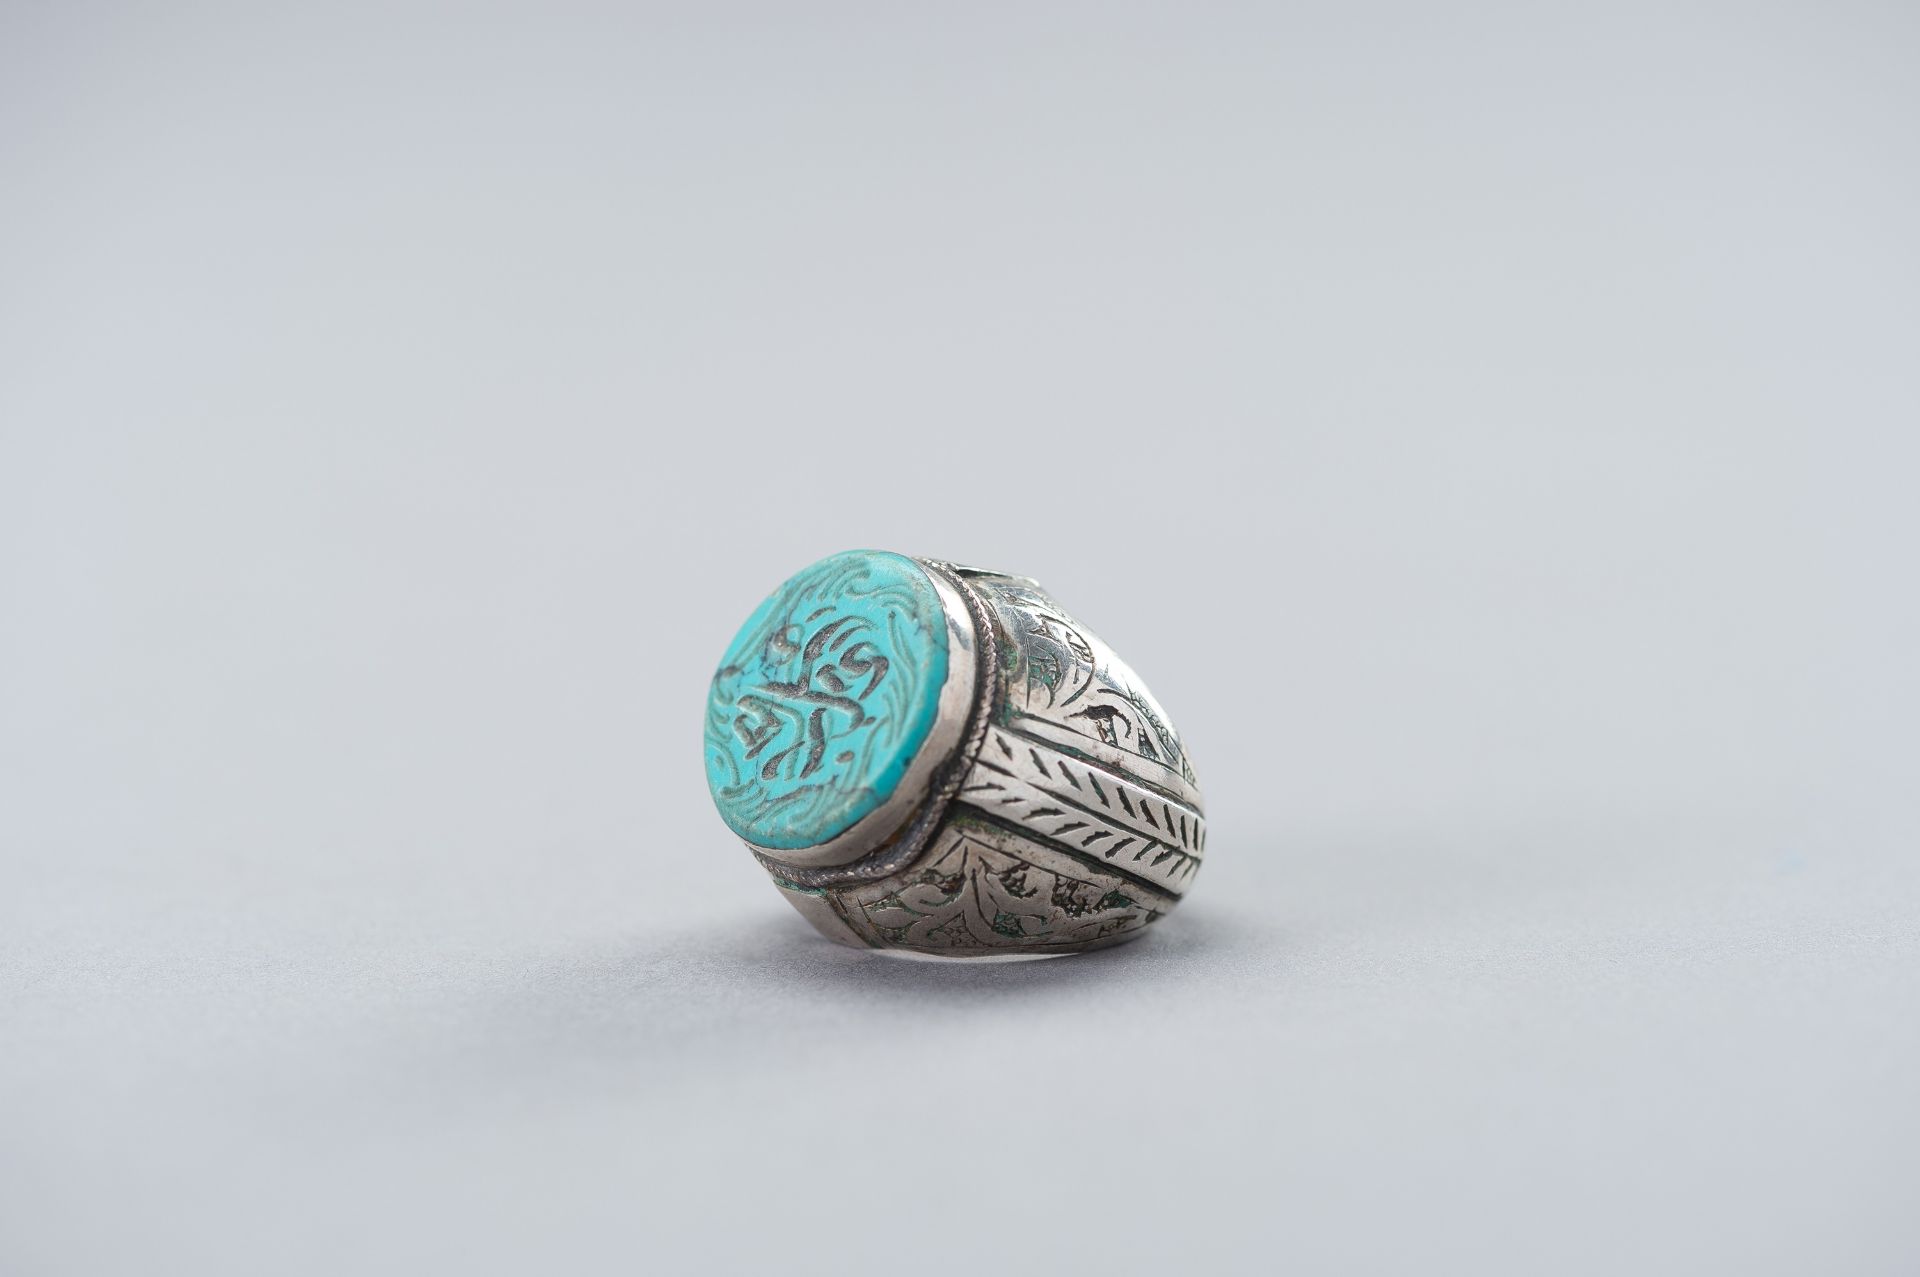 A PERSIAN SILVER RING WITH TURQUOISE MATRIX INTAGLIO, 19TH CENTURY - Image 8 of 9